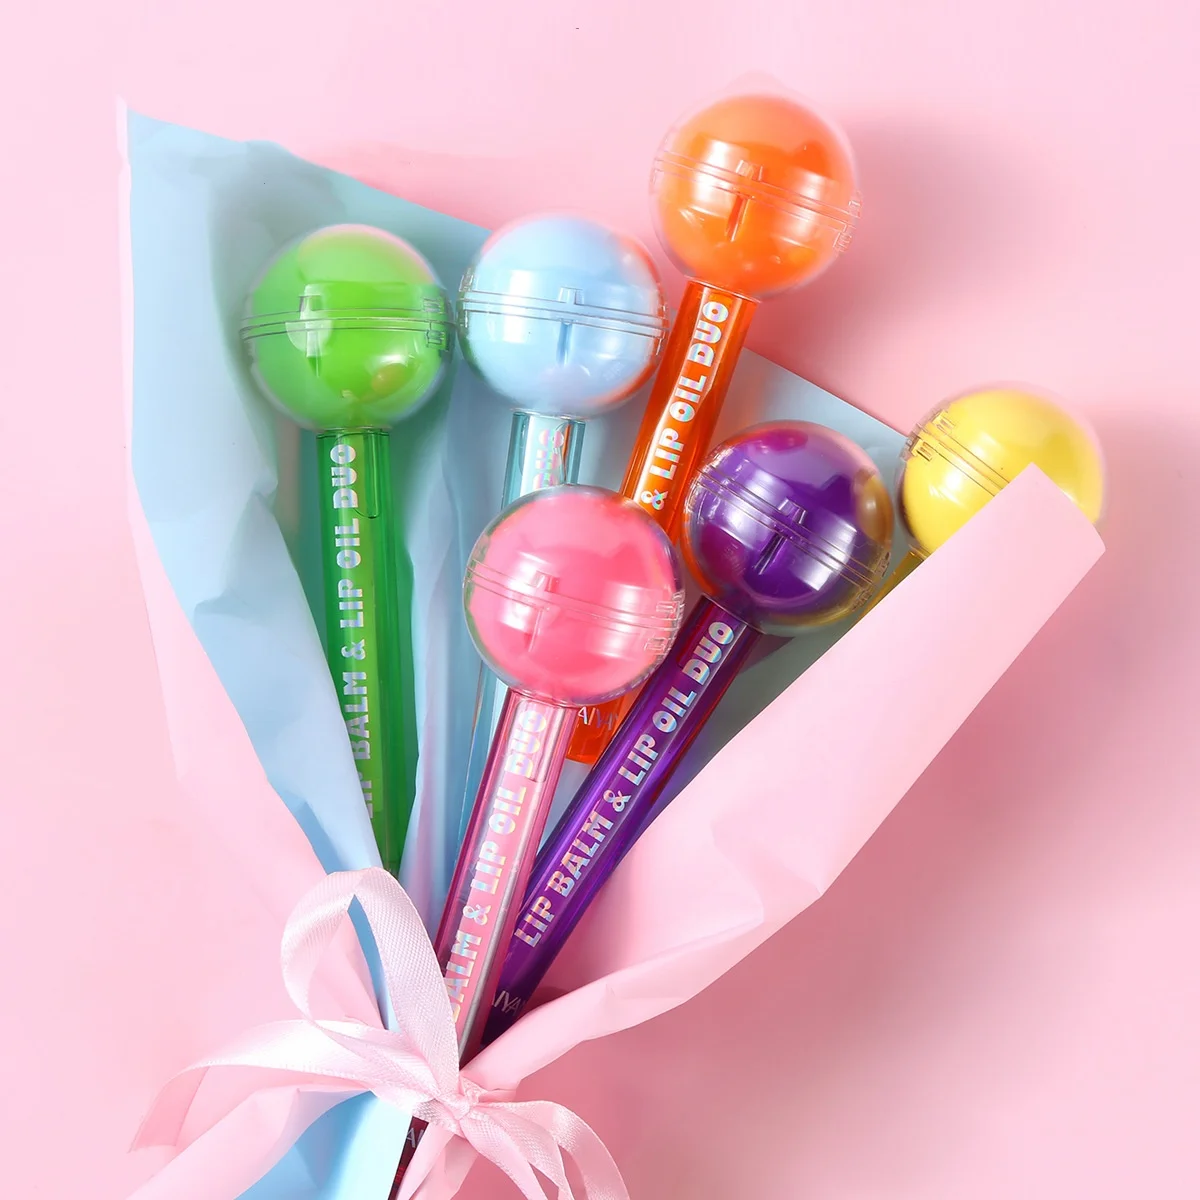 

Tik Tok Hot selling Color changing lollipop Lip Balm Water Toot Anti Dry Lip Oil Tube Cute Lip Glaze Moisturizing Lipgloss, As picture shown